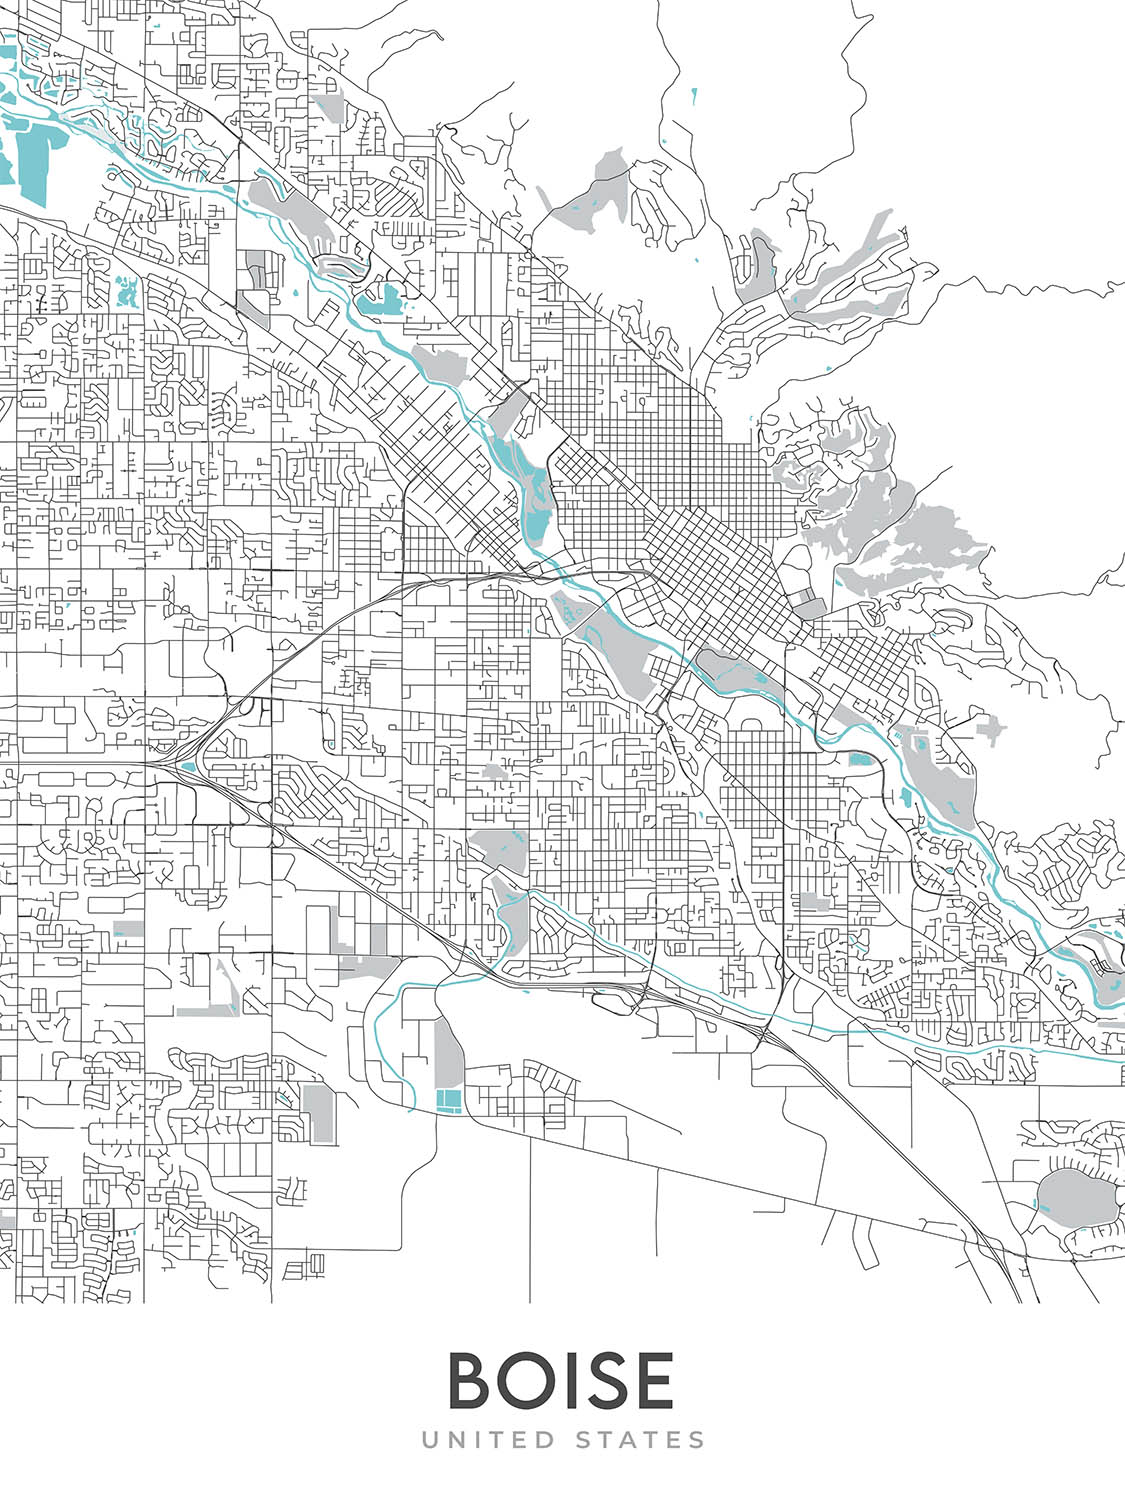 Modern City Map of Boise, ID: Downtown, Boise State University, Idaho State Capitol, Hyde Park, Boise River